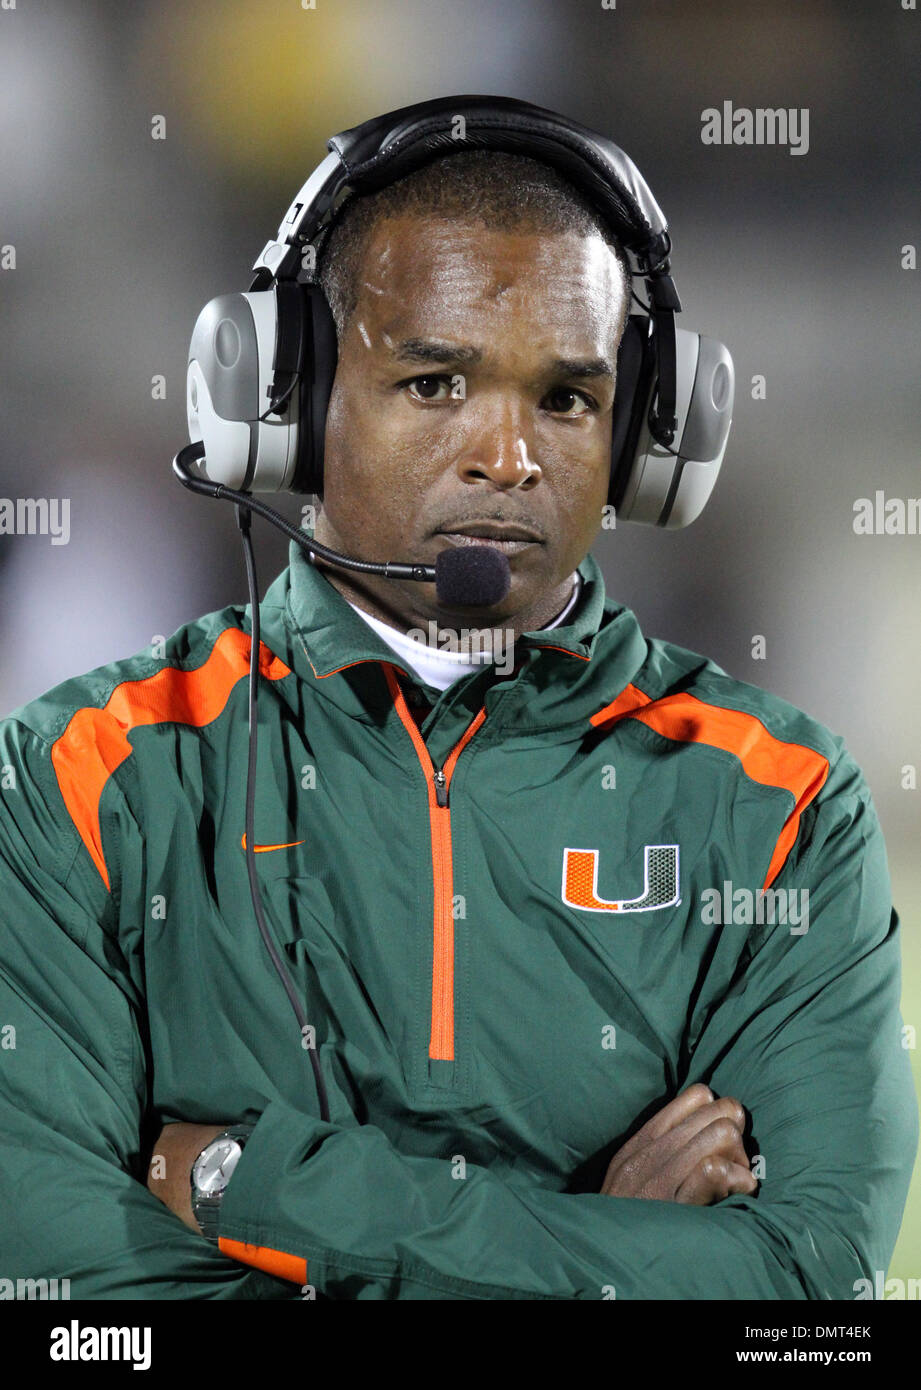 miami-fl-head-coach-randy-shannon-paces-the-sidelines-late-in-the-DMT4EK.jpg